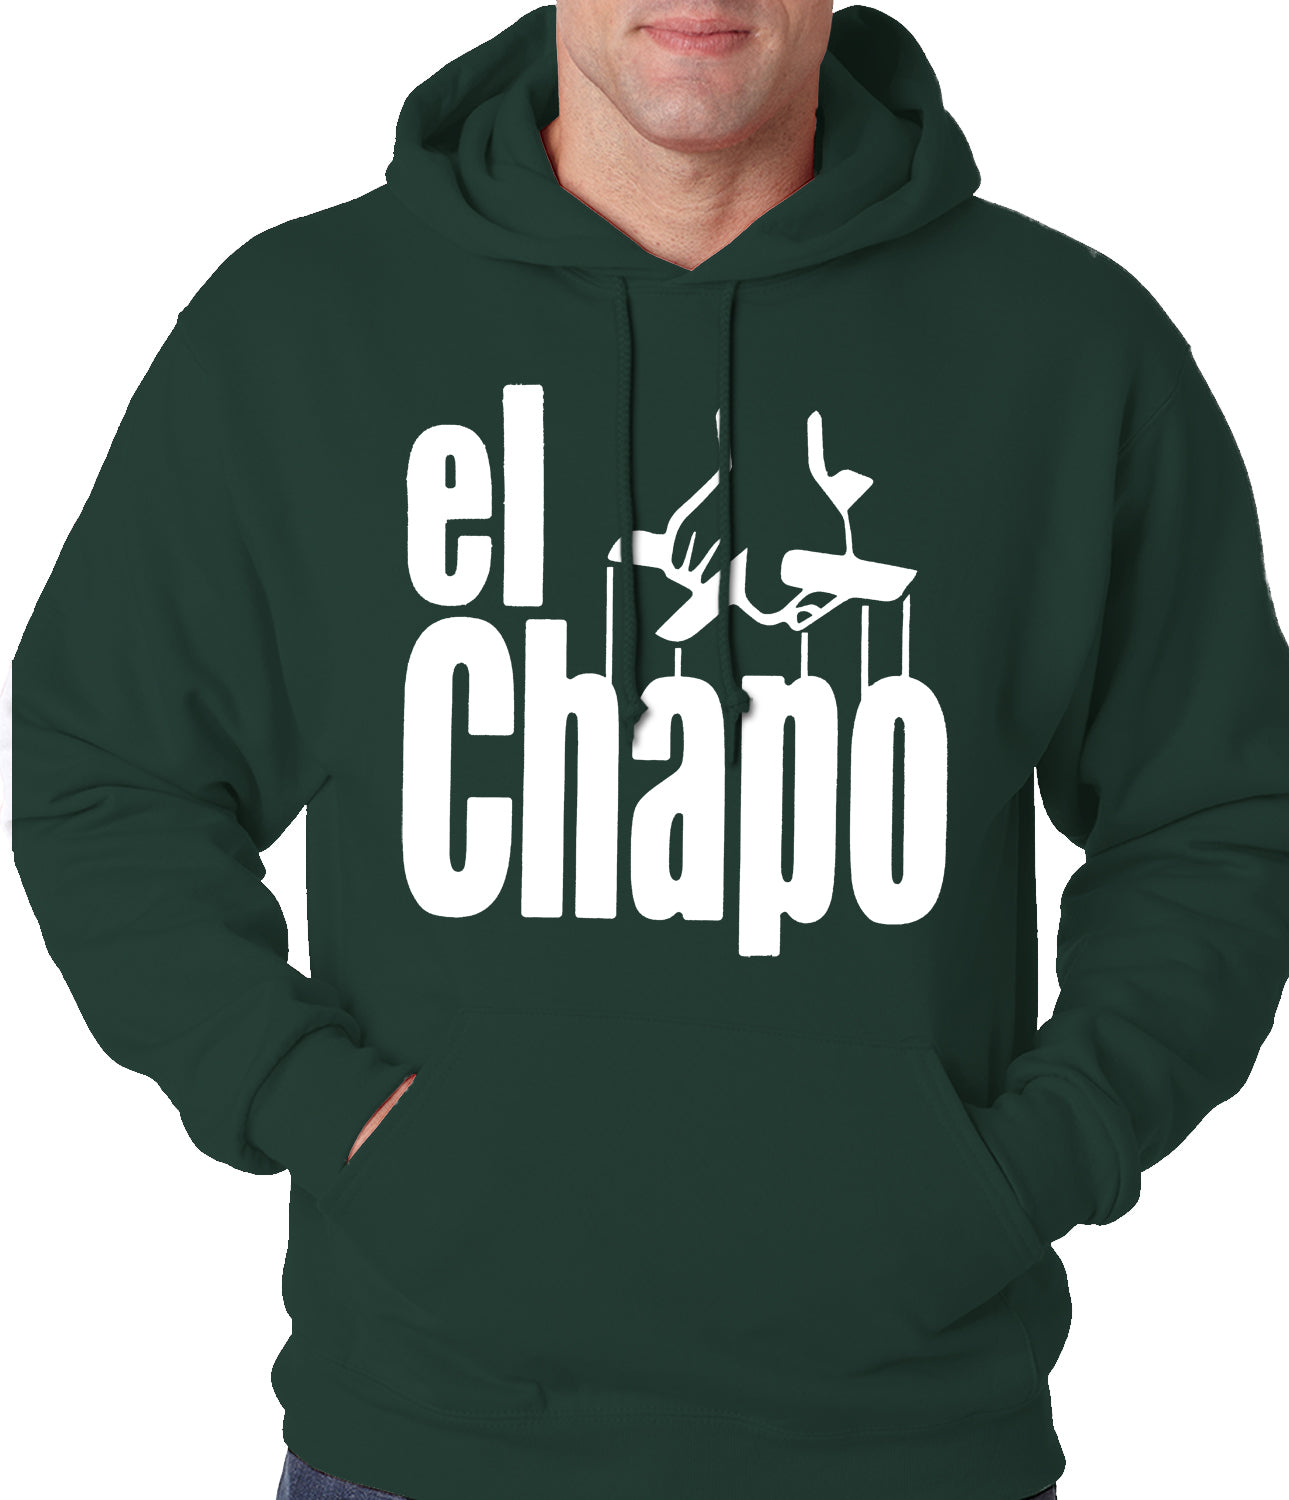 The God Father Inspired El Chapo Adult Hoodie